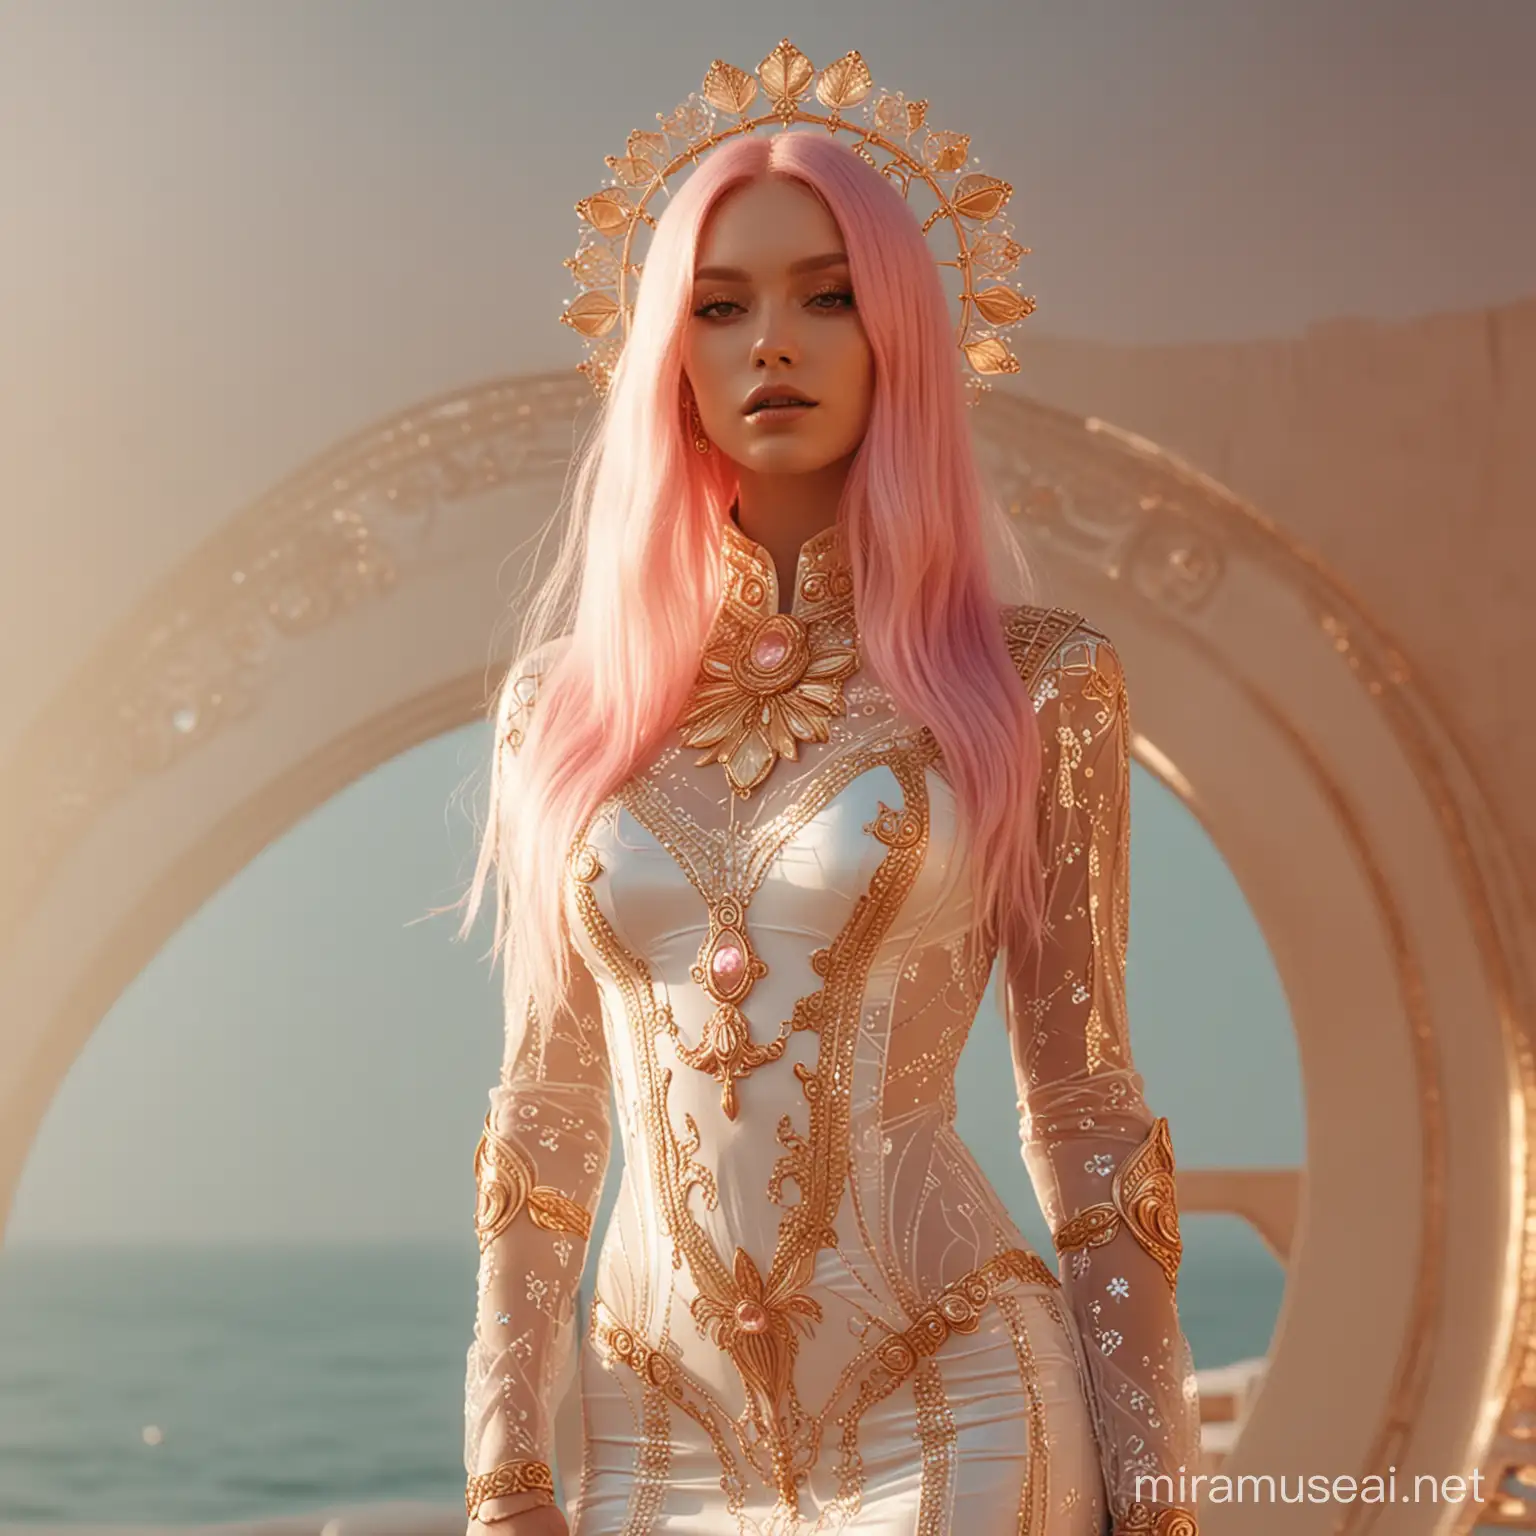 Futuristic Goddess in Ornate White and Gold Dress Ethereal Fantasy Art